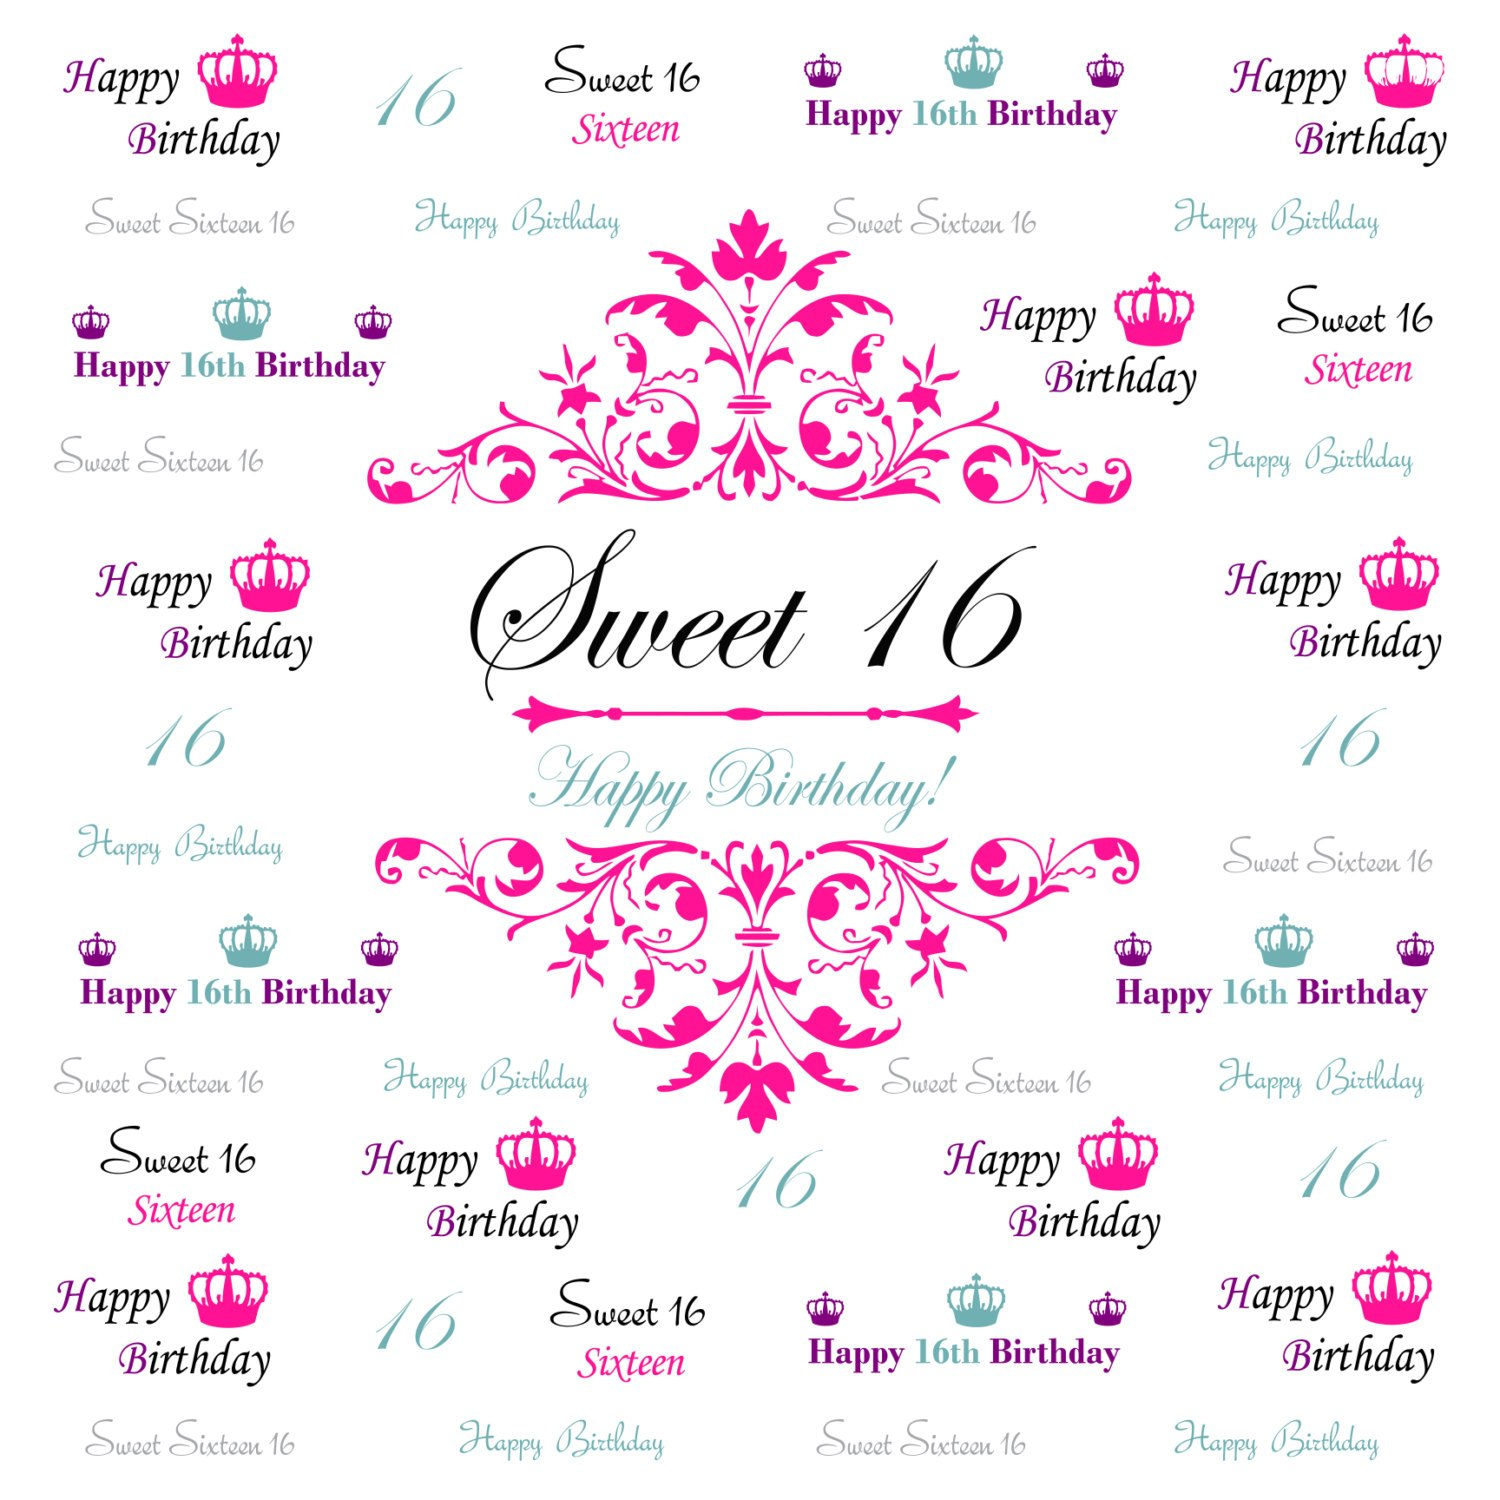 Sweet 16 Banner Template - Atlantaauctionco Regarding Sweet 16 Banner Template